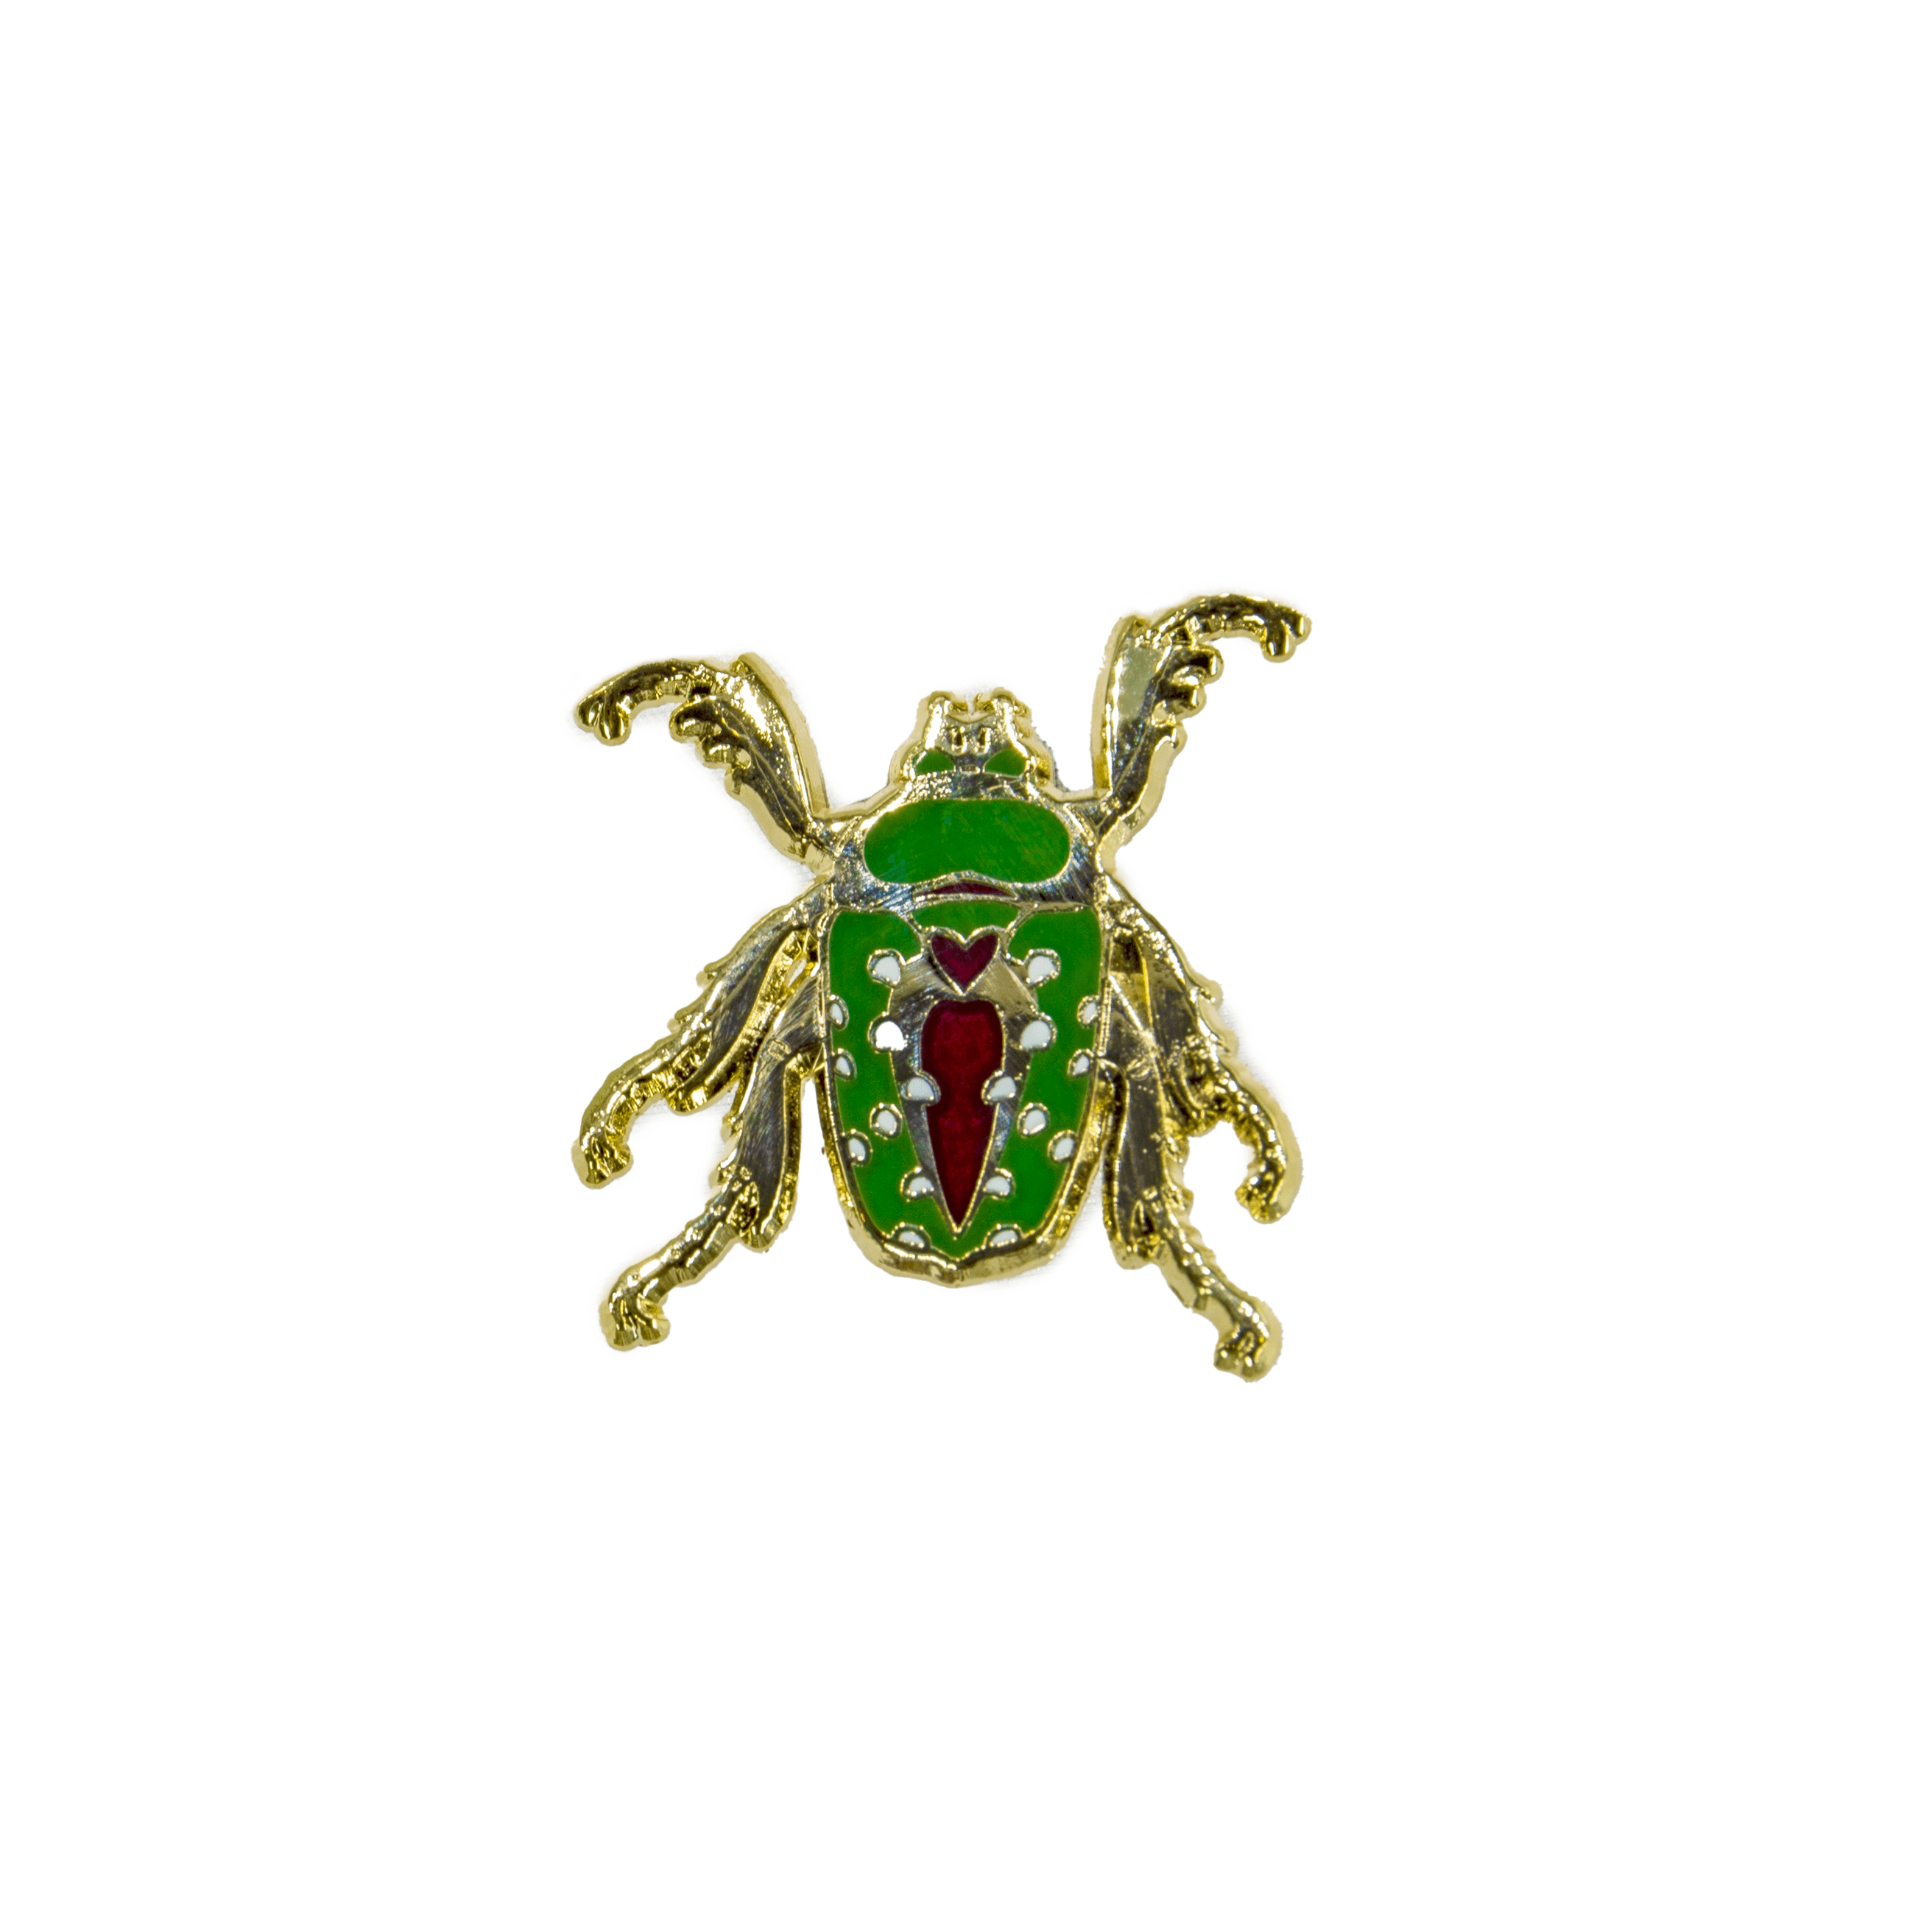 A red, green, white, orange, and gold enamel pin of the Mistletoe Beetle (Stephanorrhina guttata) with wings outstretched.